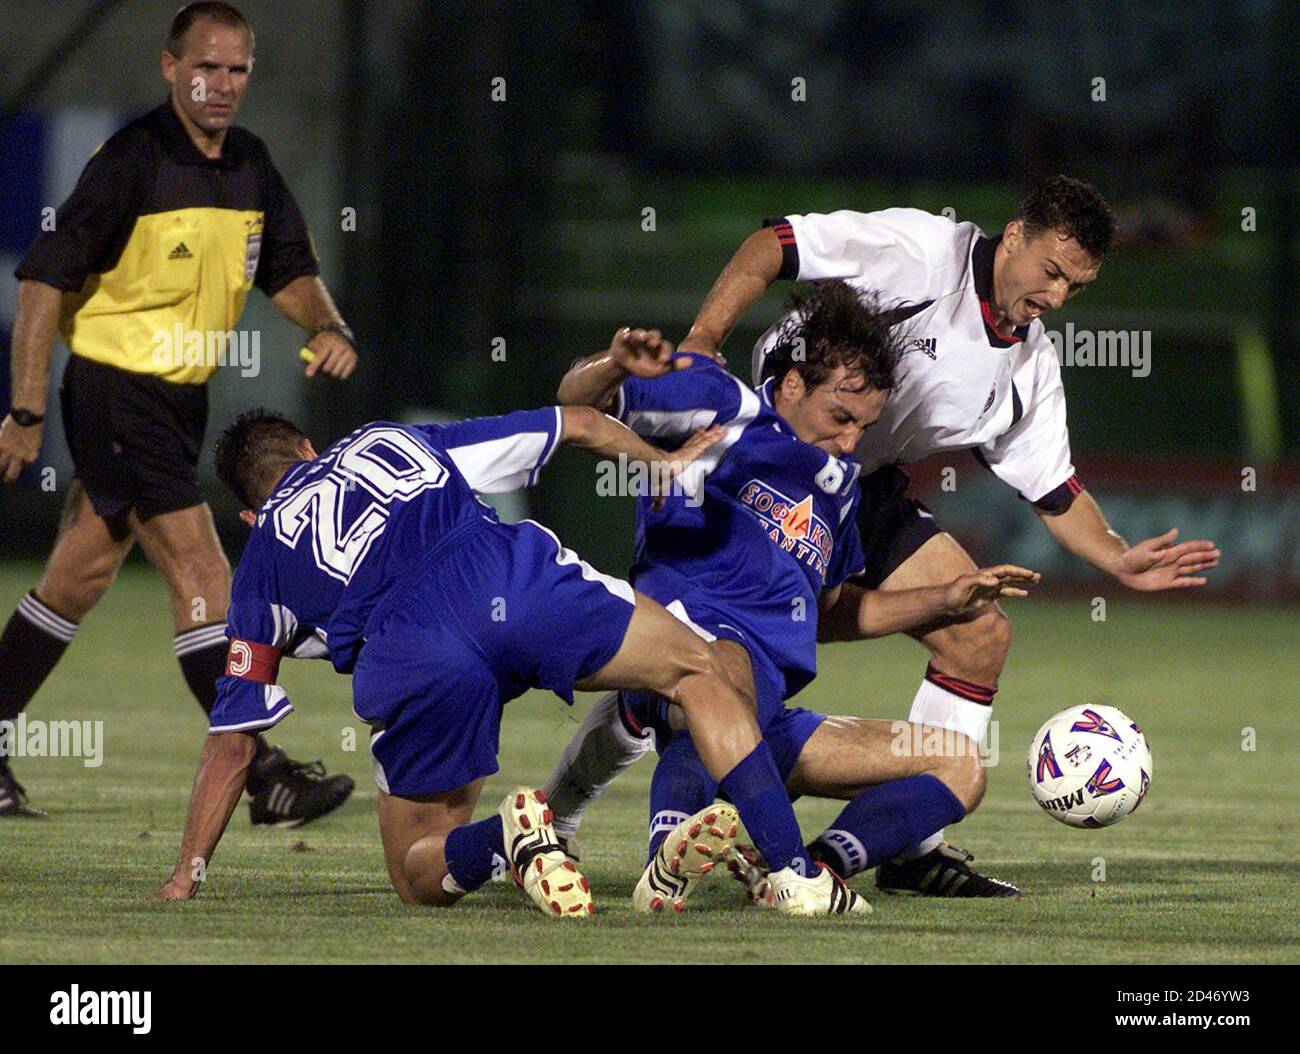 Fulham's Steed Malbranque (R) struggles for the ball against Egaleo's  Georgios Alexopoulos (C) and Ioannis Skopelitis during a third round,  second leg UEFA Intertoto Cup match in Athens July 27, 2002. REUTERS/Yiorgos